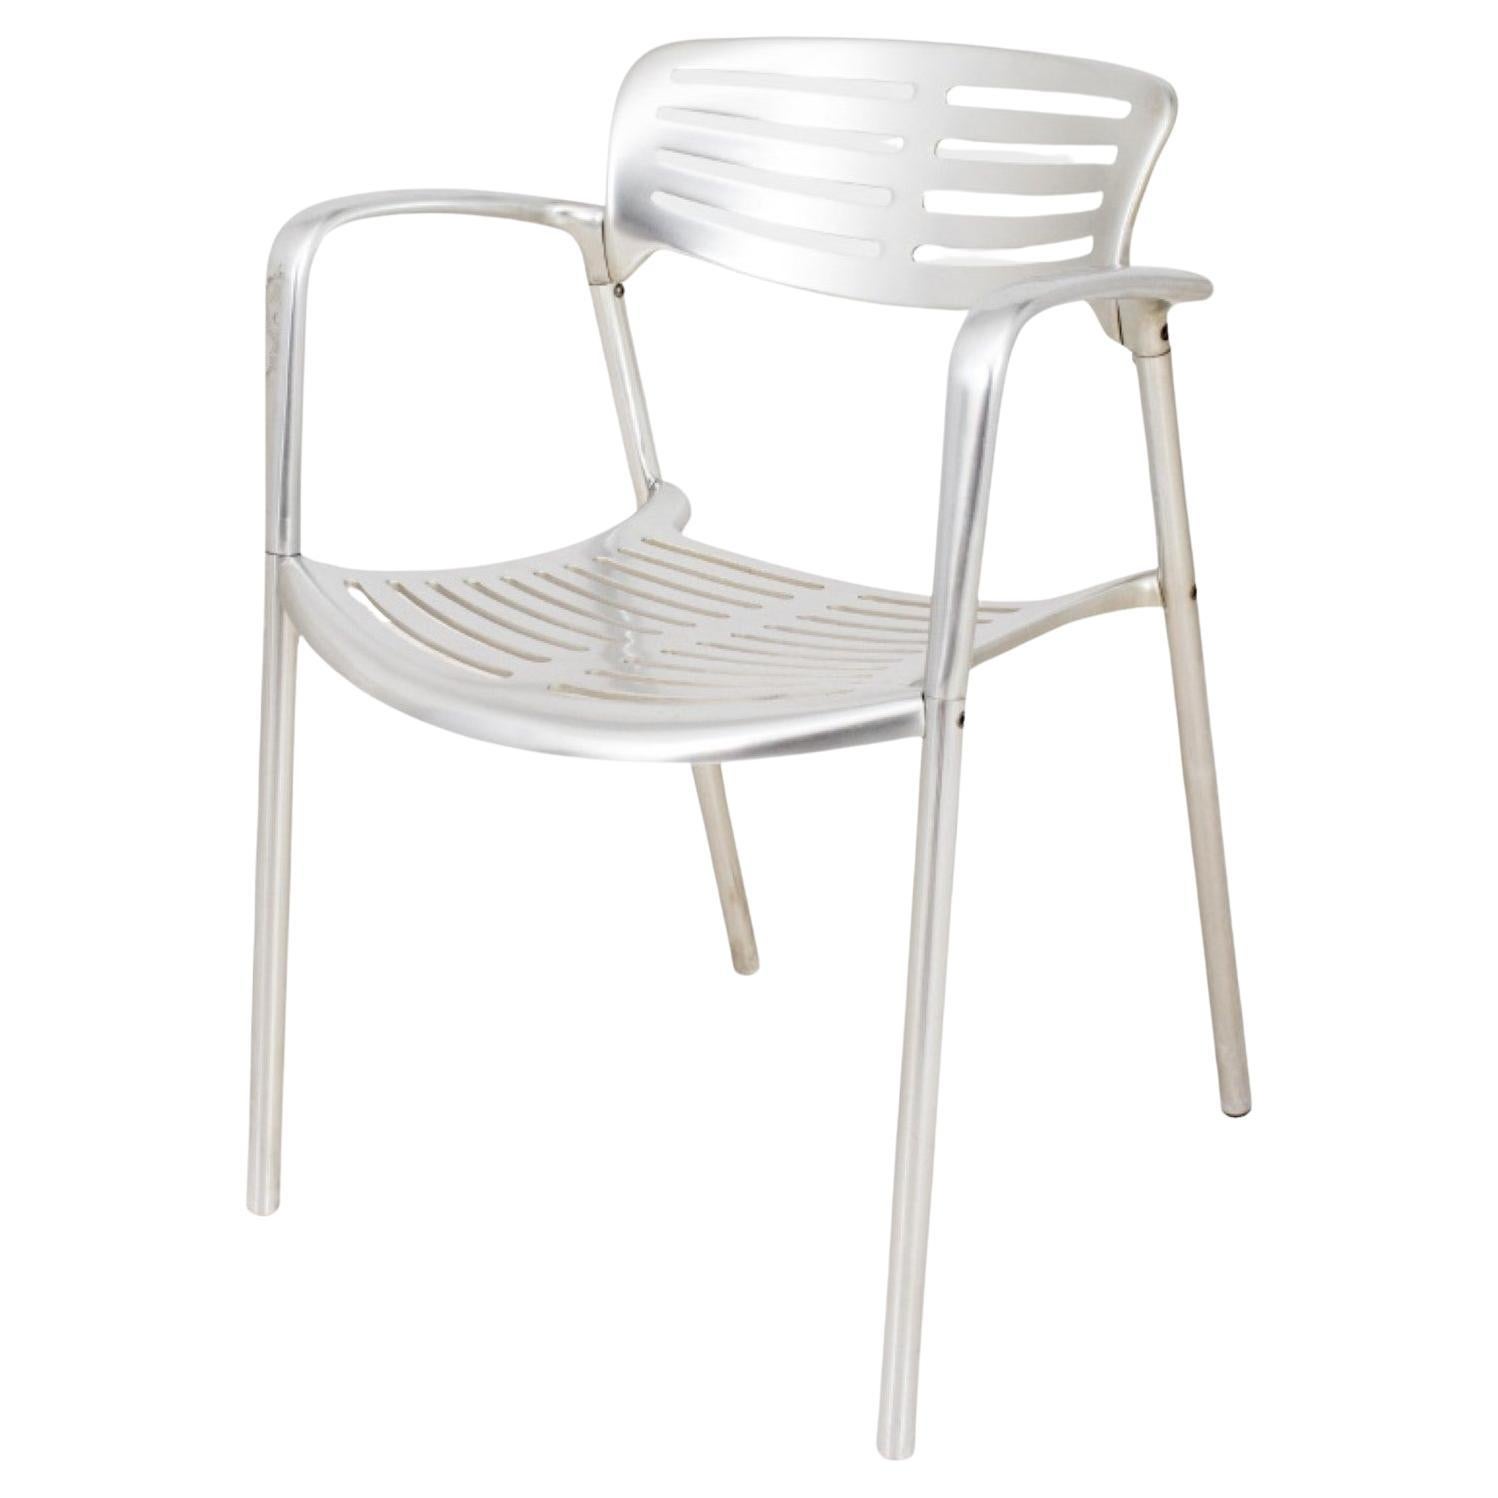 Jorge Pensi for Knoll, Inc. Amat Toledo Chair For Sale